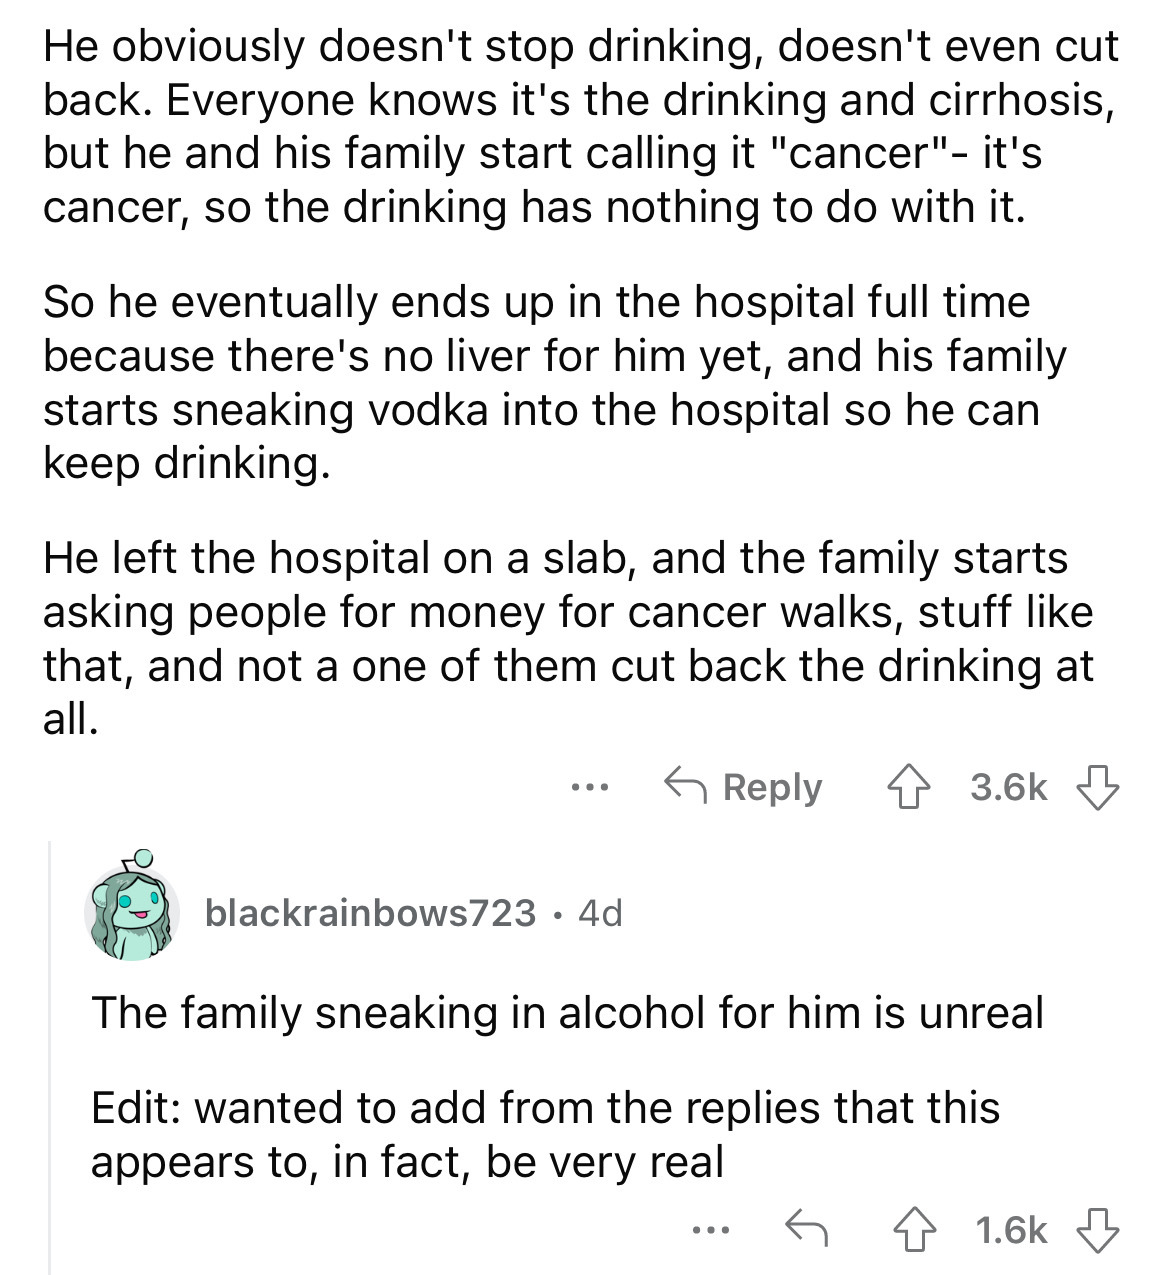 angle - He obviously doesn't stop drinking, doesn't even cut back. Everyone knows it's the drinking and cirrhosis, but he and his family start calling it "cancer" it's cancer, so the drinking has nothing to do with it. So he eventually ends up in the hosp